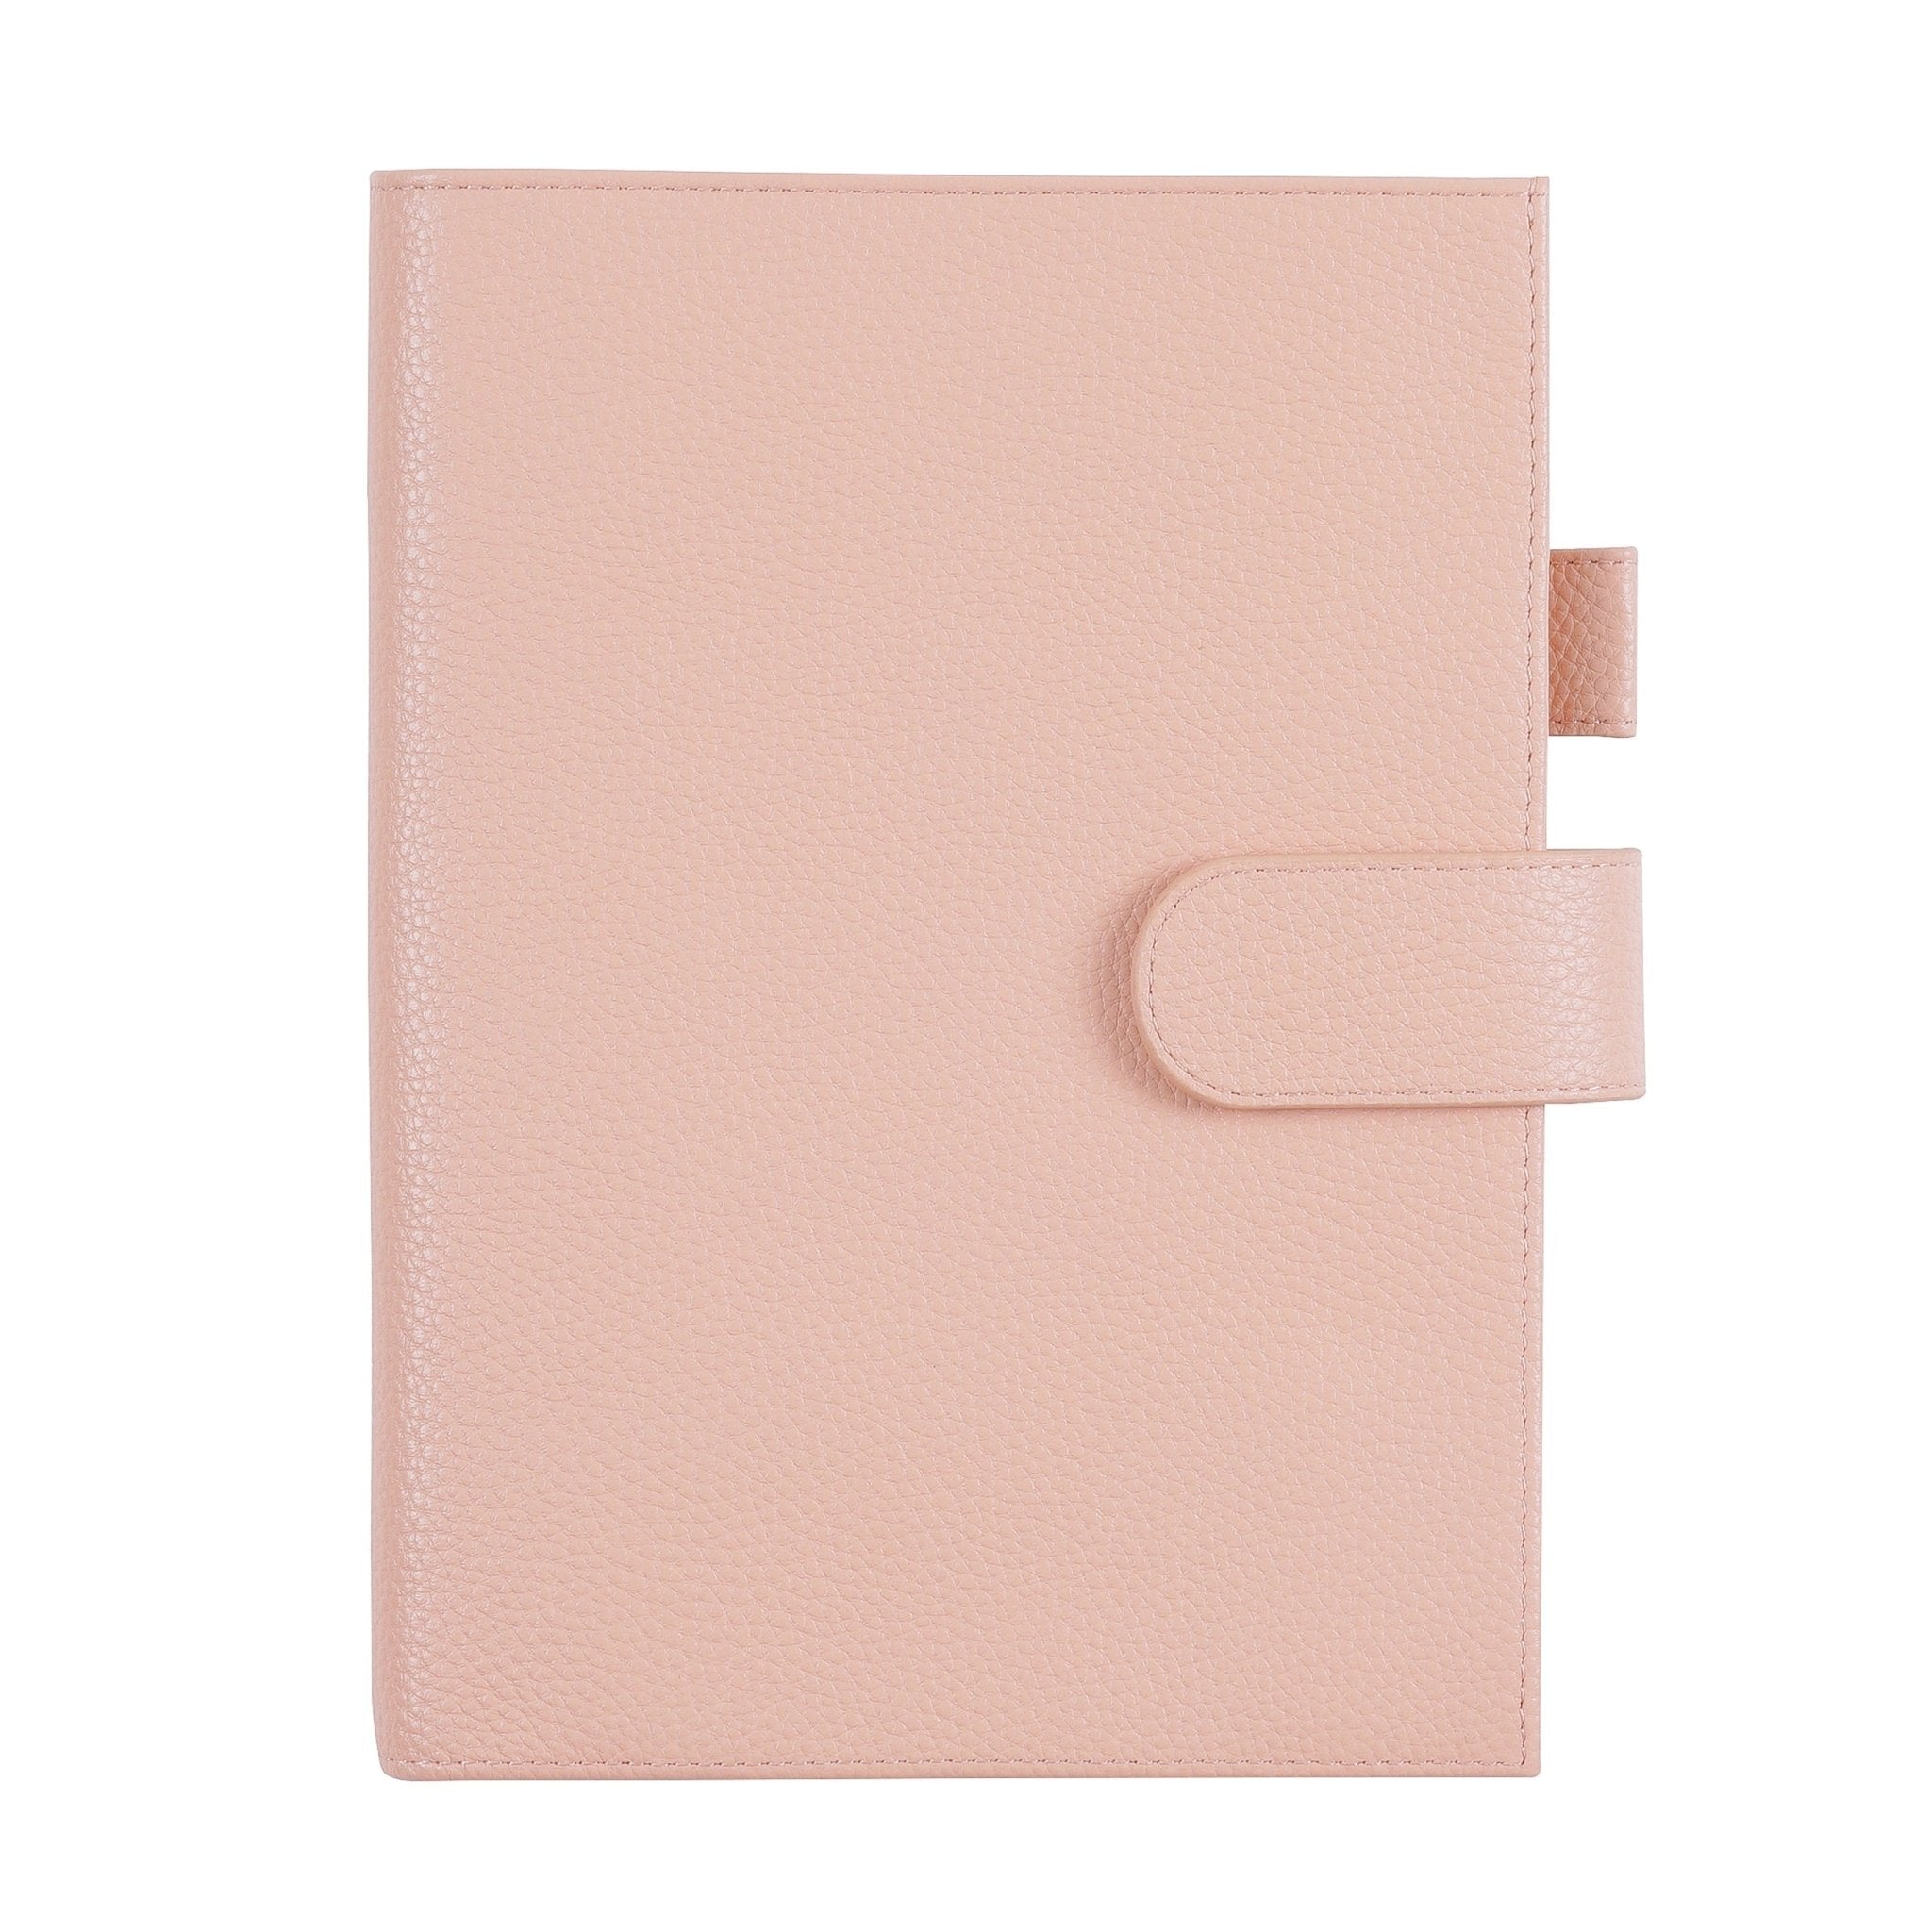 Paponei's A5 Moterm Leather Cover in Navy and Blue Pink Gray White